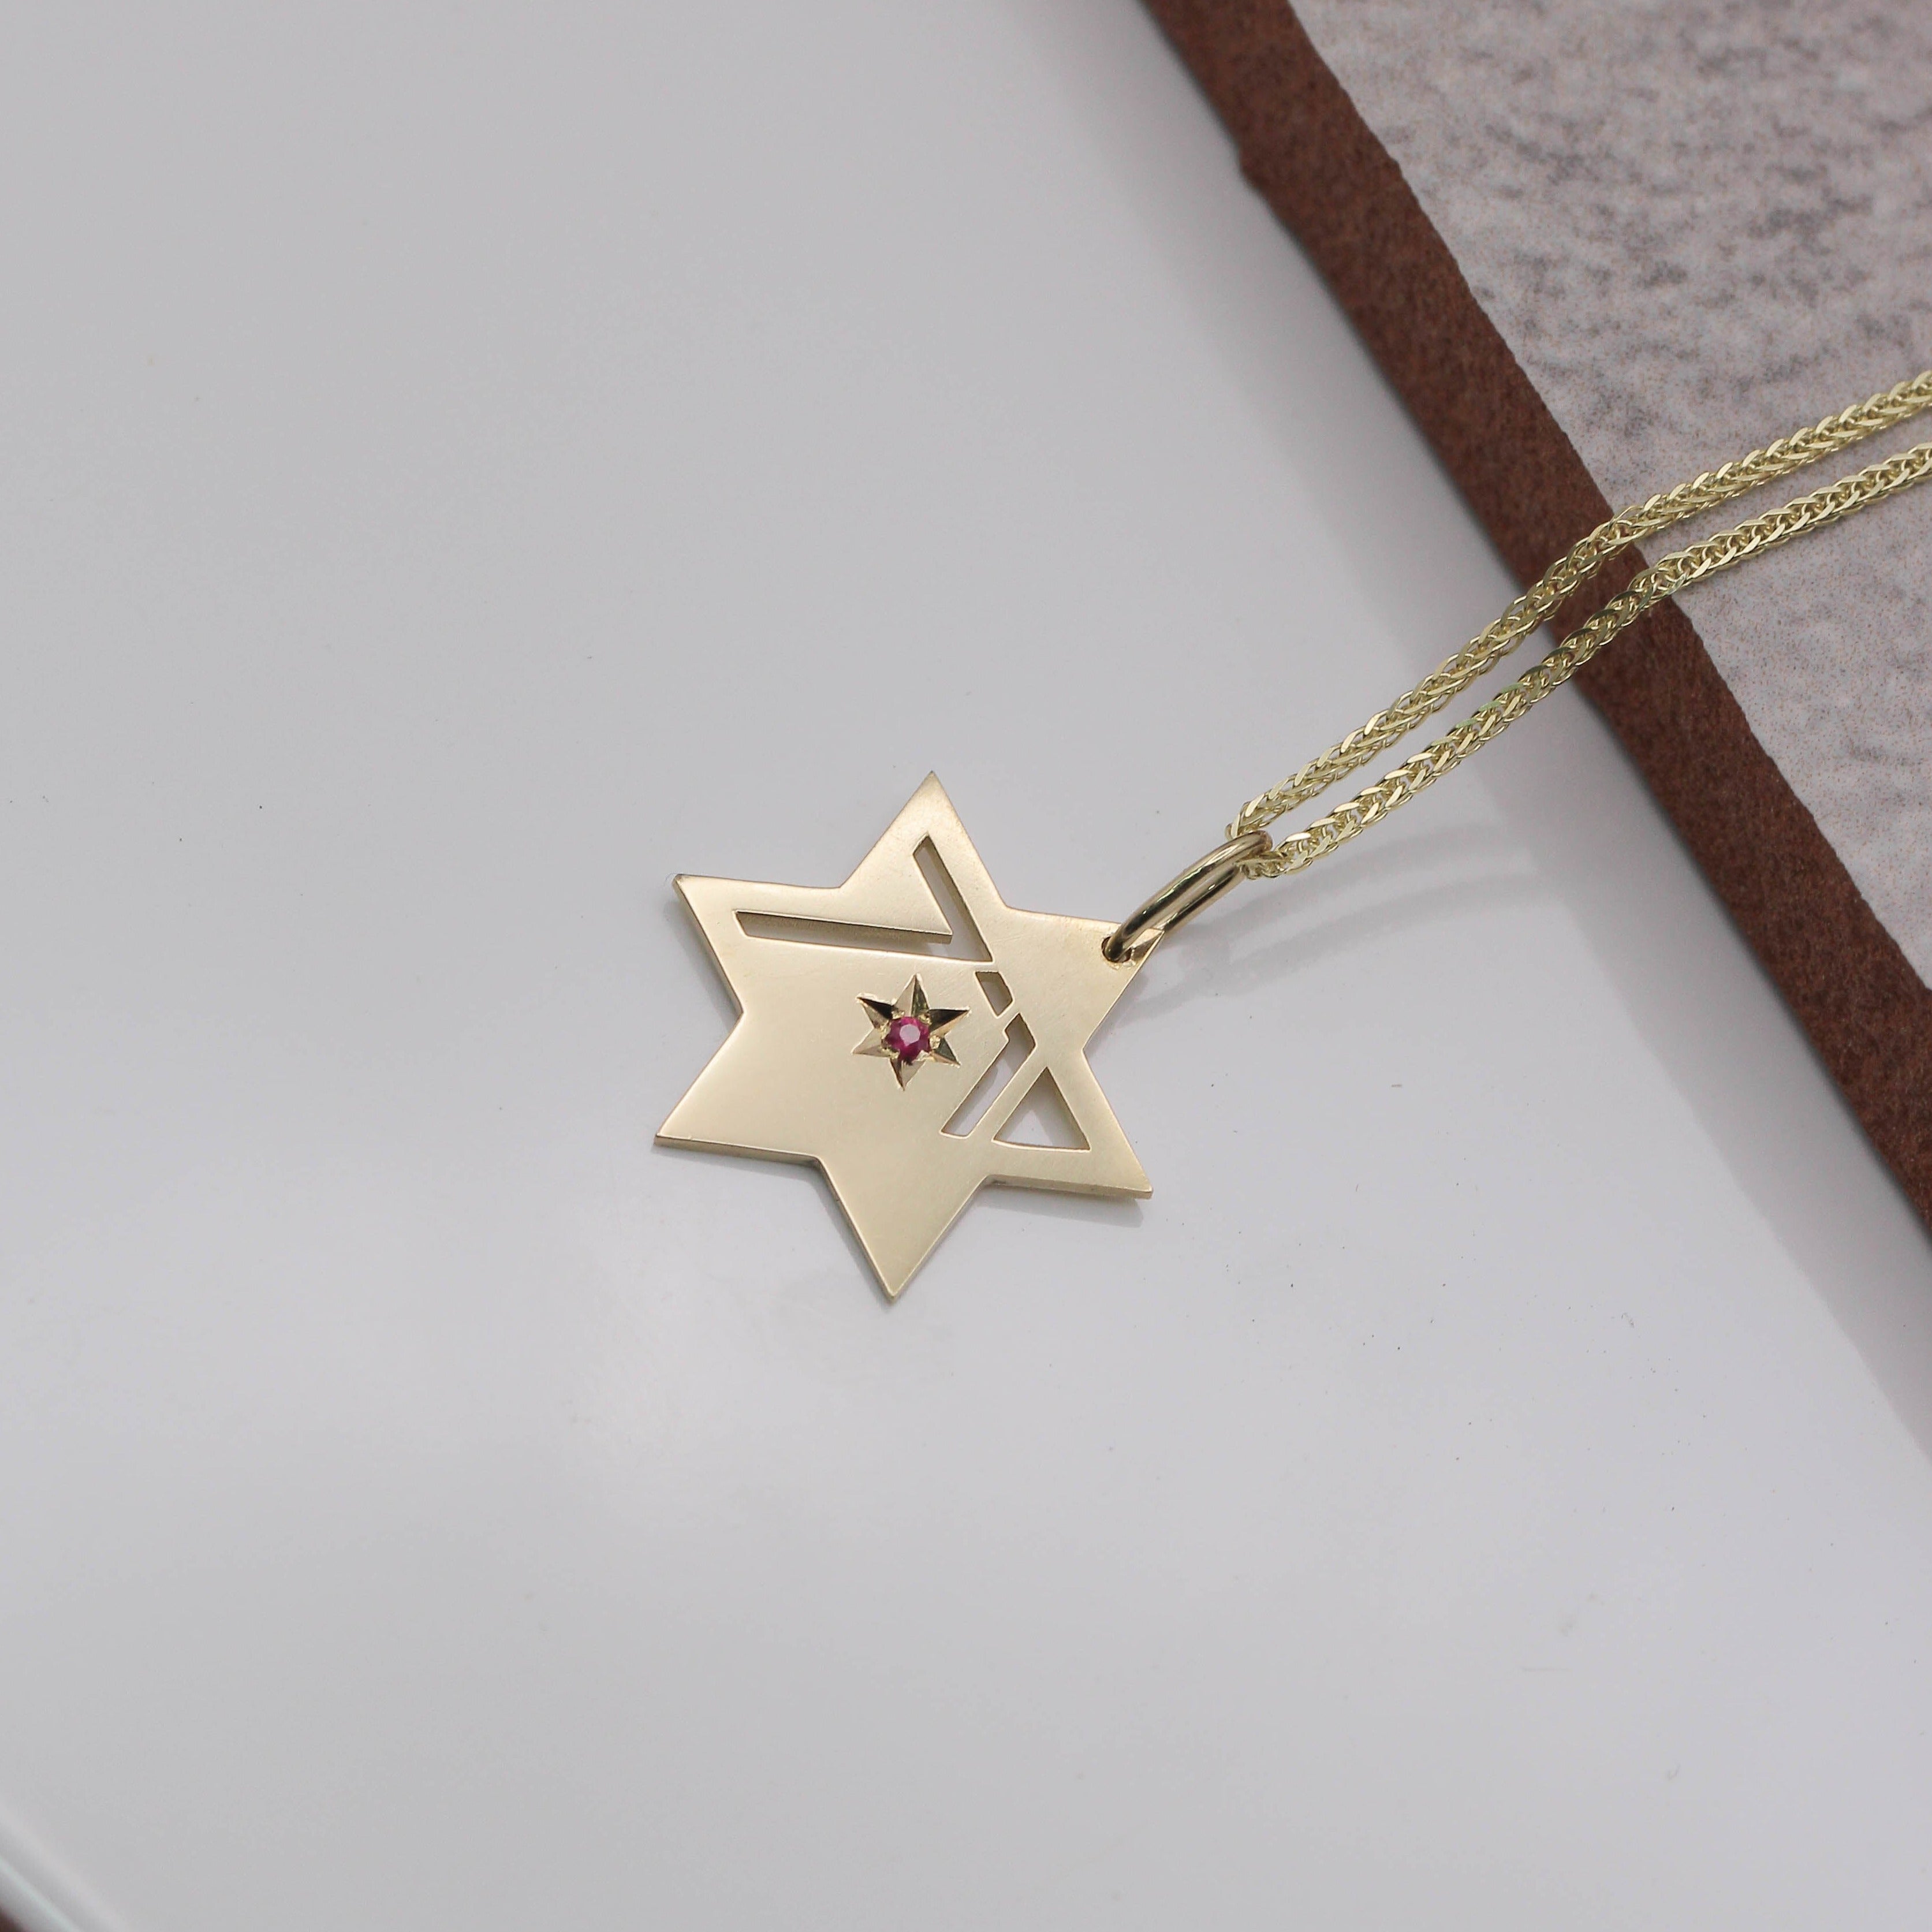 Heroism Star Of David Gold Necklace With Ruby